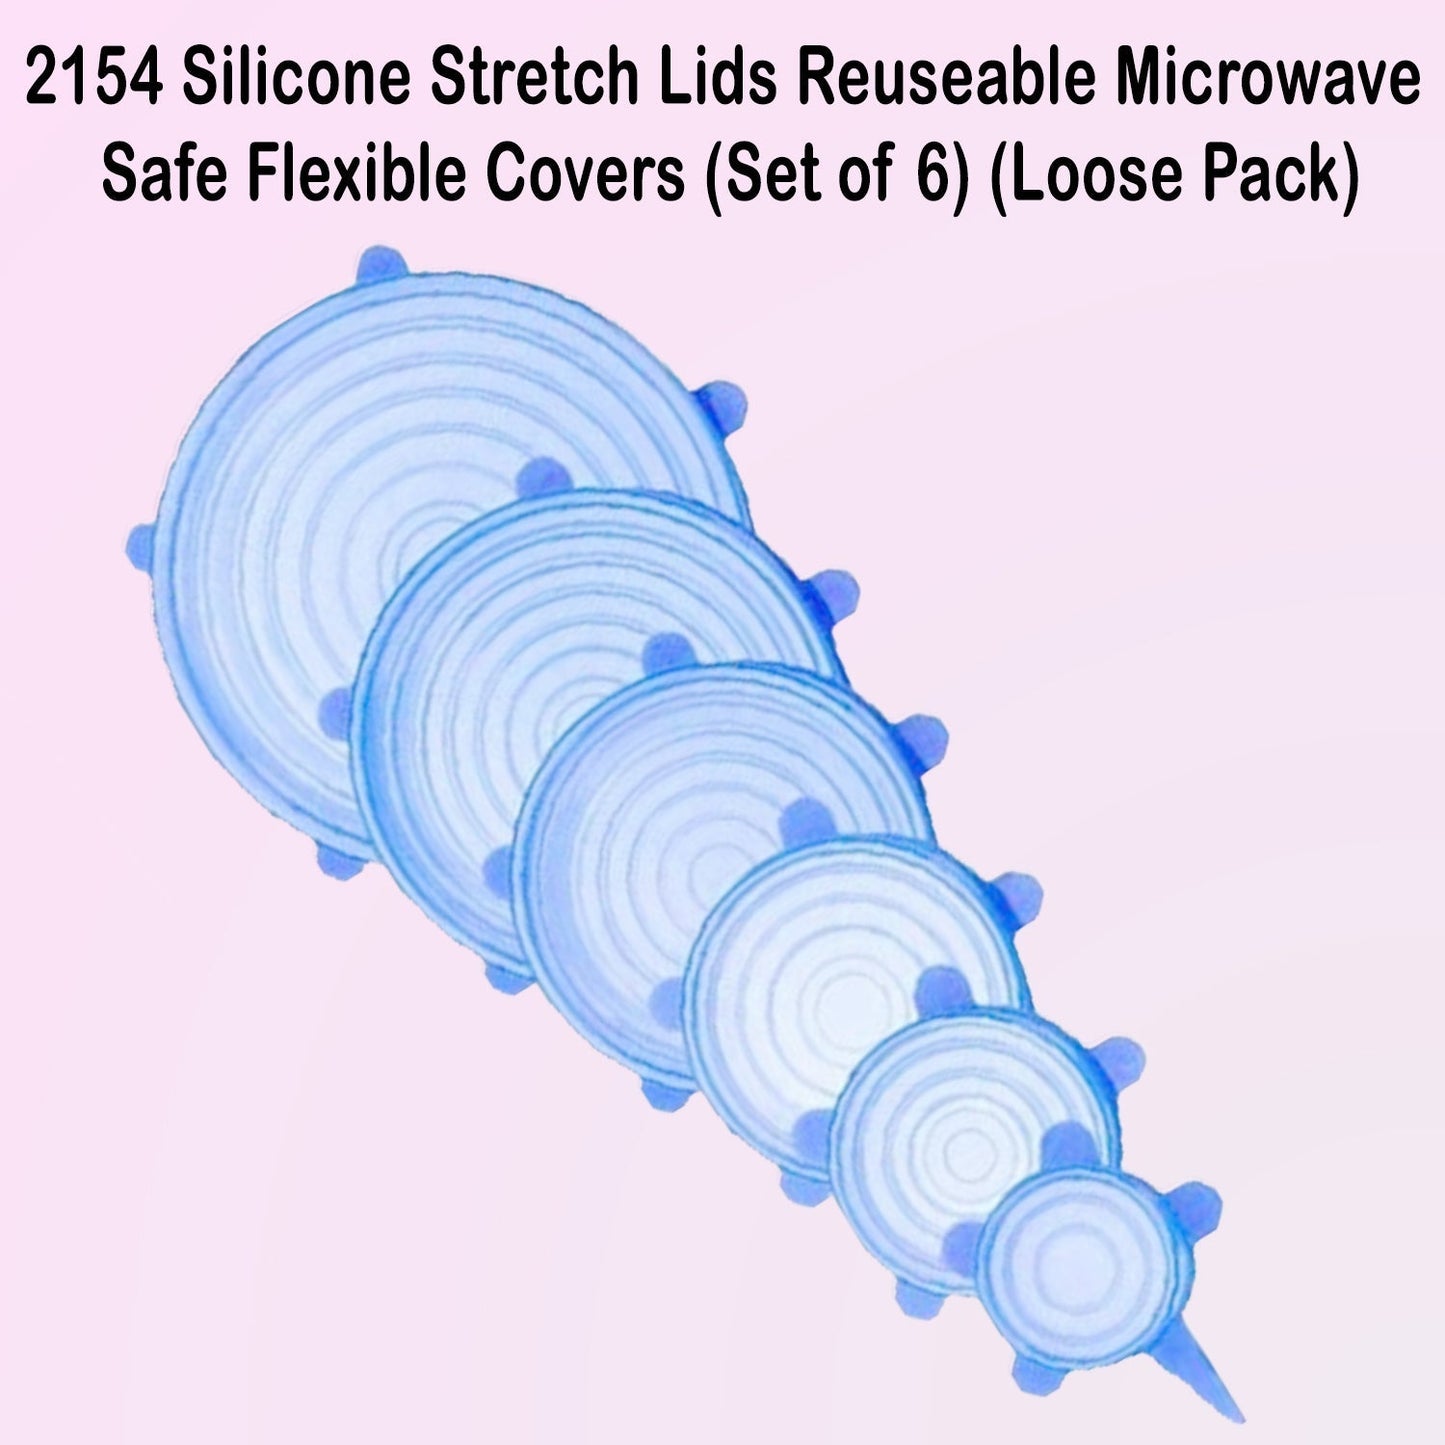 2154 Silicone Stretch Lids Reuseable Microwave Safe Flexible Covers (Set of 6) (Loose Pack) JK Trends